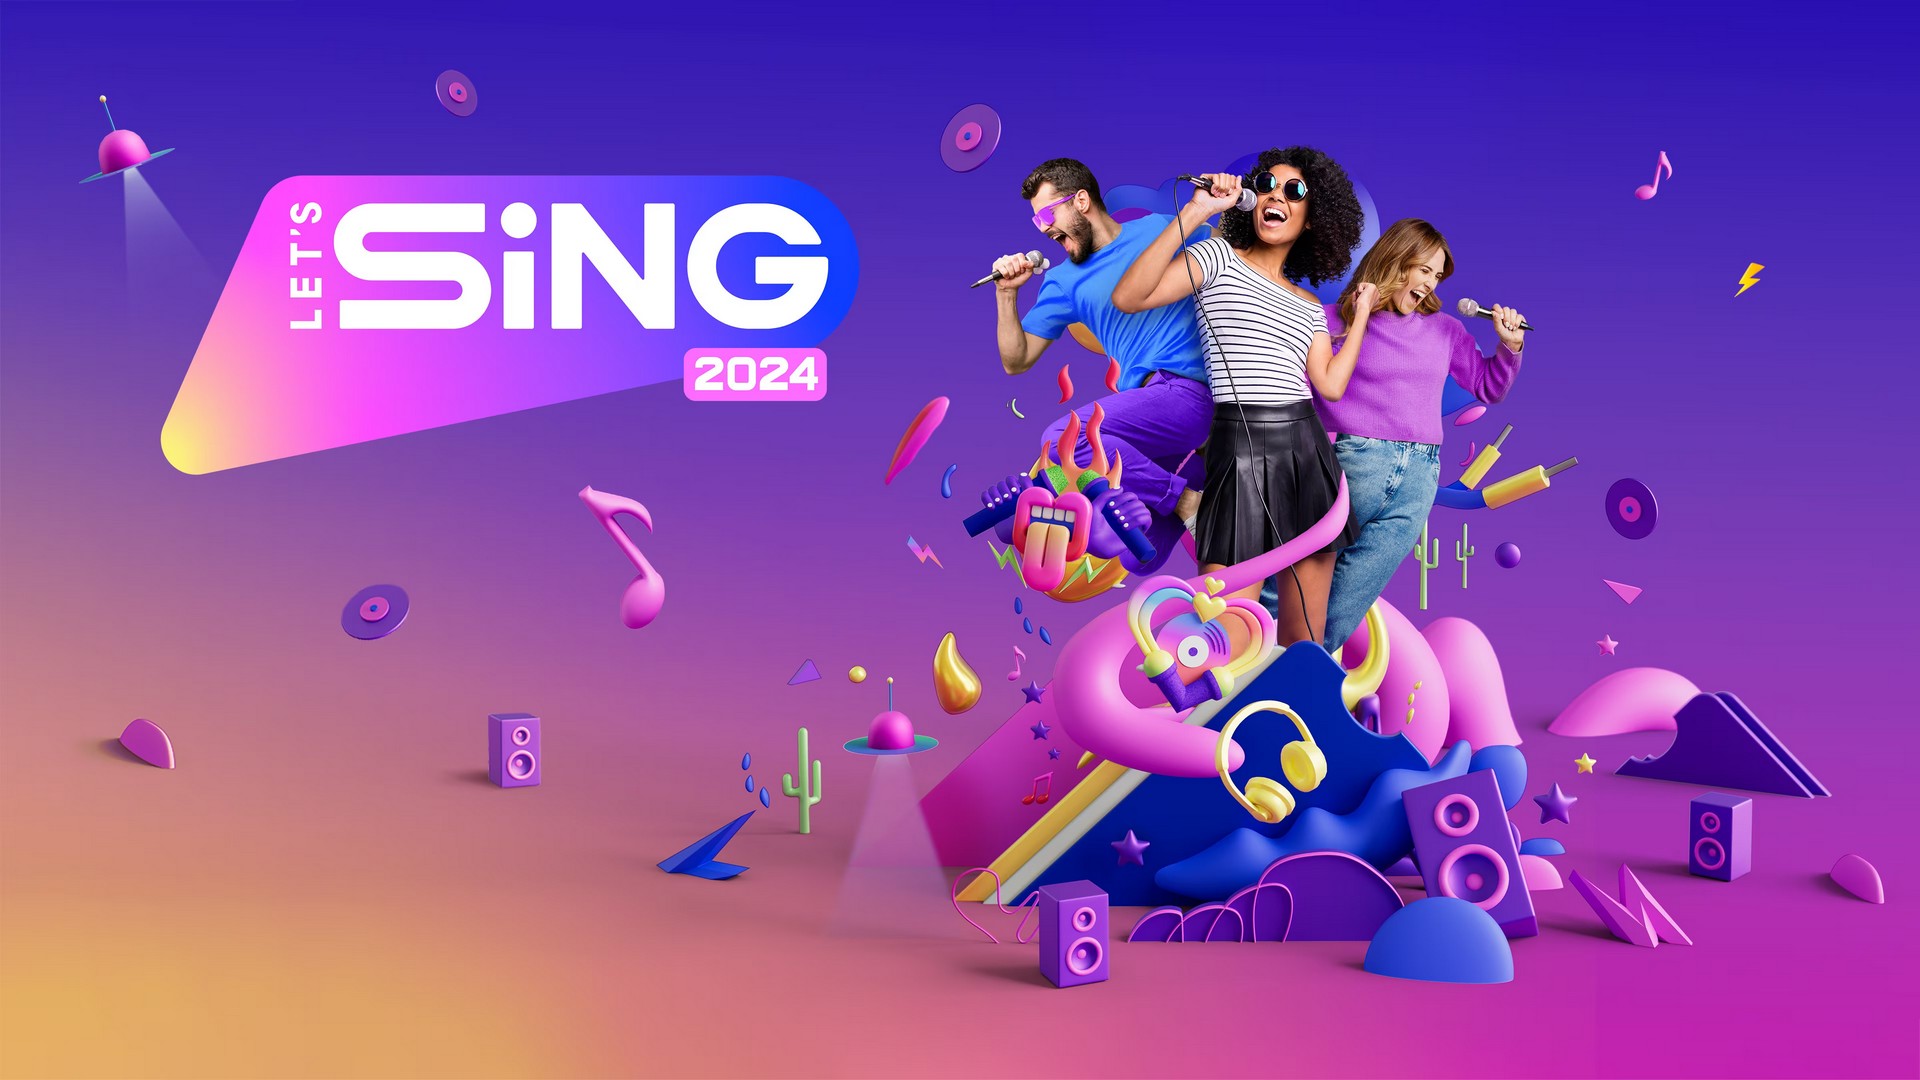 Let’s Sing 2024 – VIP Pass Gets 20 Additional Songs